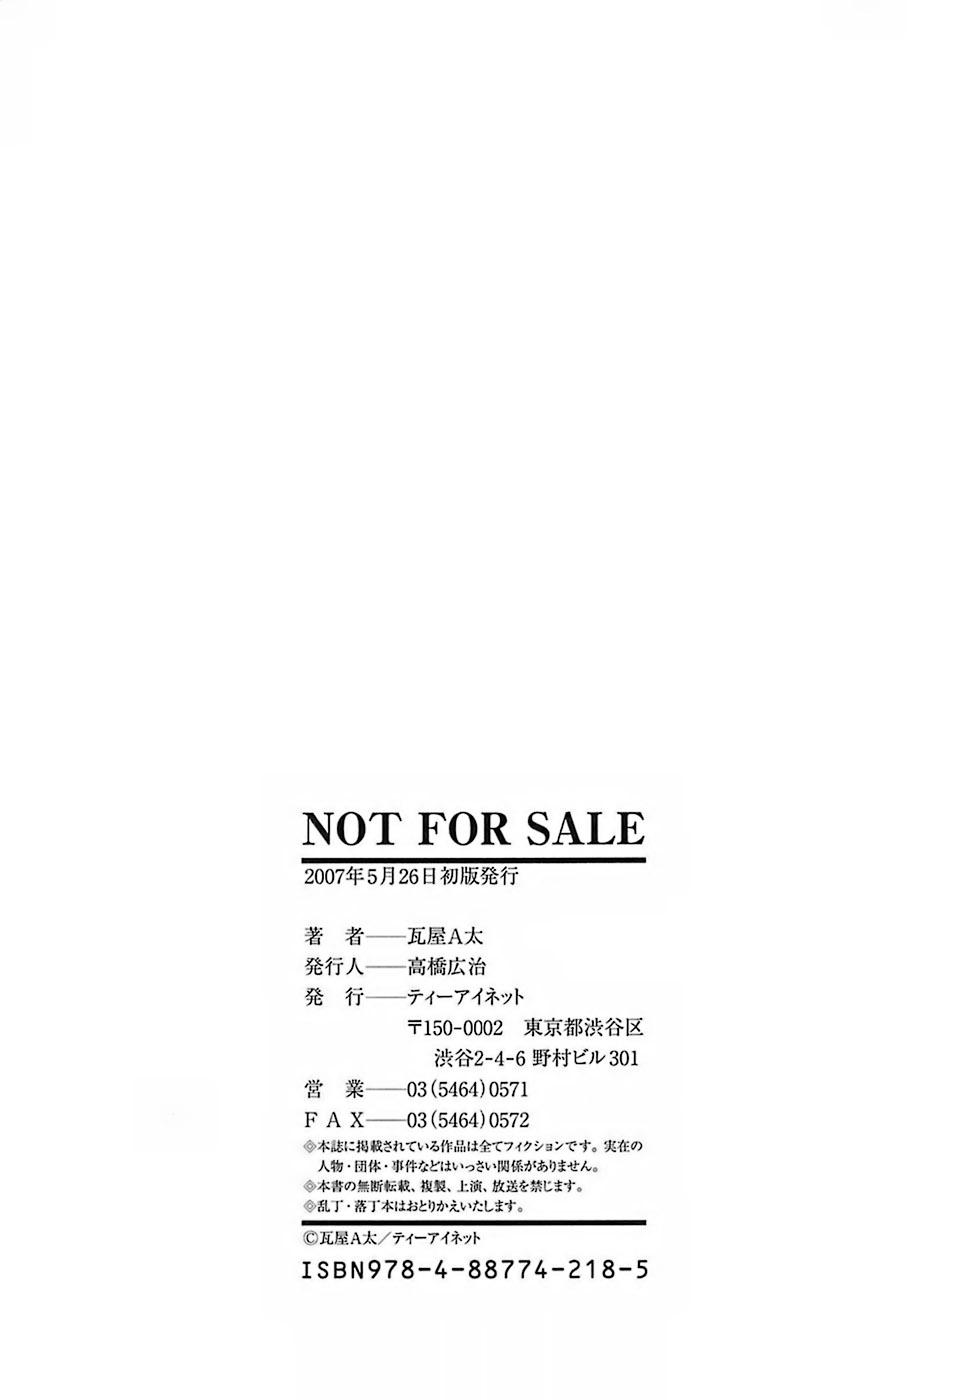 Not For Sale 188